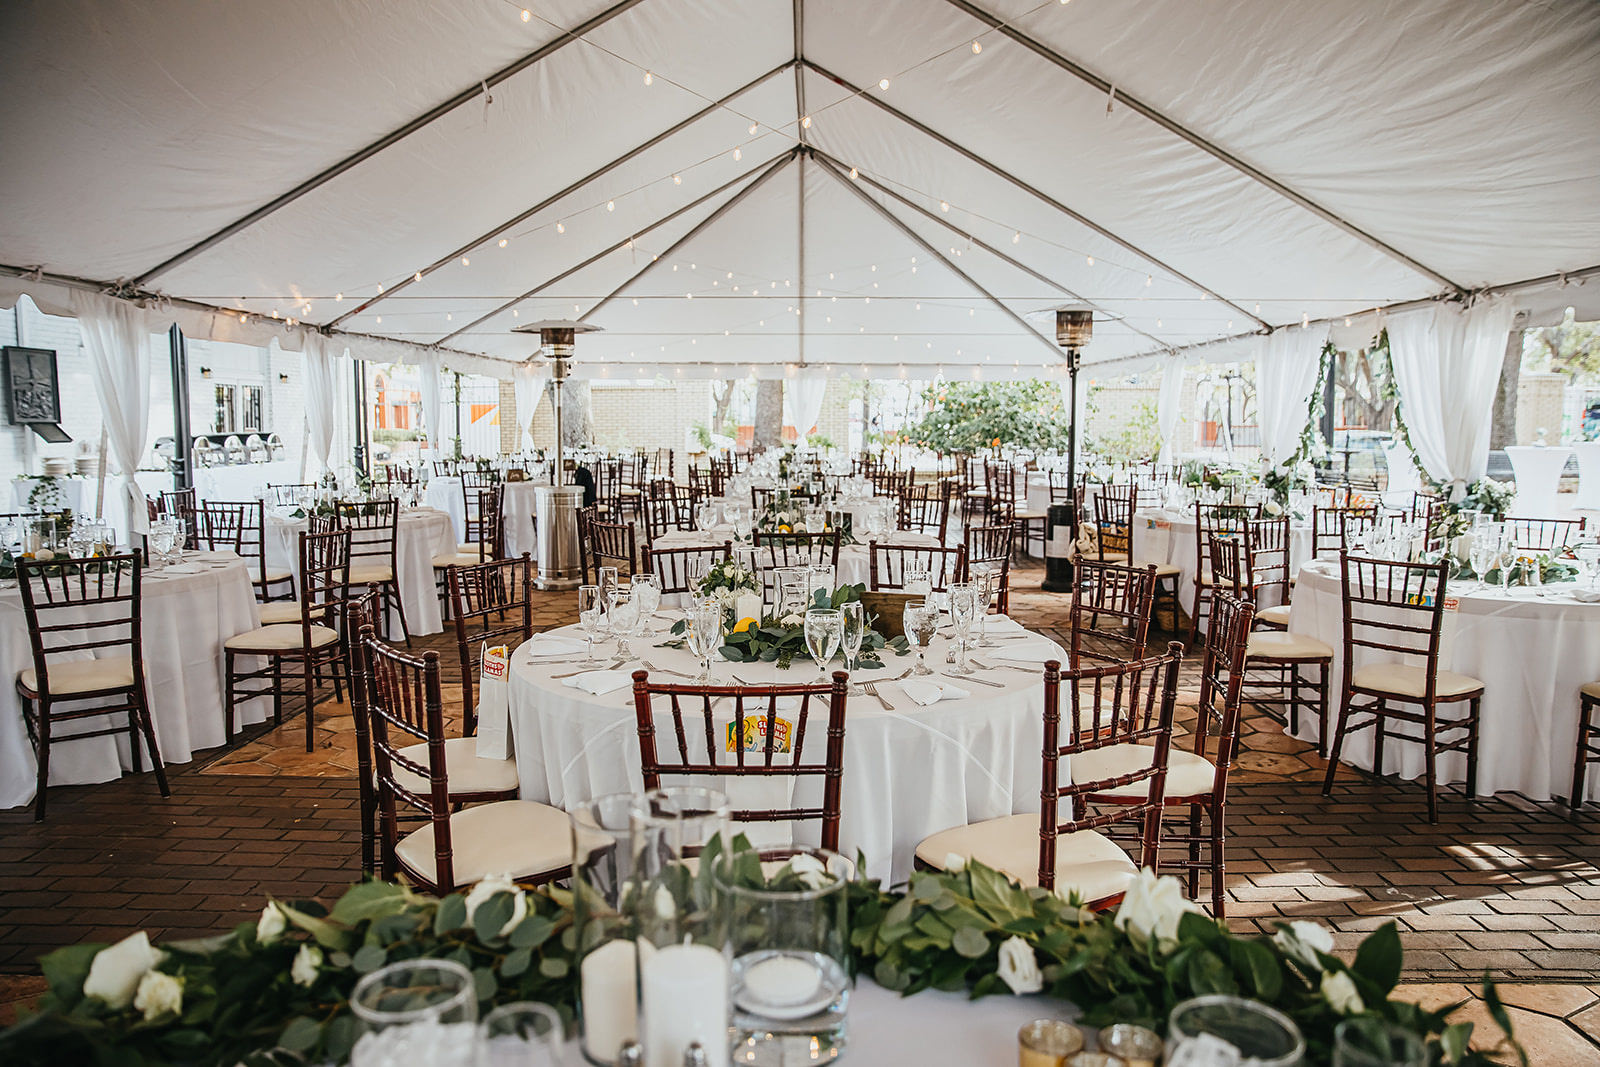 Outdoor Garden Wedding Reception Tent with Canopy String Lights | Round White Tables with Mahogany Wood Chiavari Chairs and Greenery Wreath Centerpieces with Lemons and Hurricane Pillar Candles by Tampa Wedding Florist Monarch Events and Designs